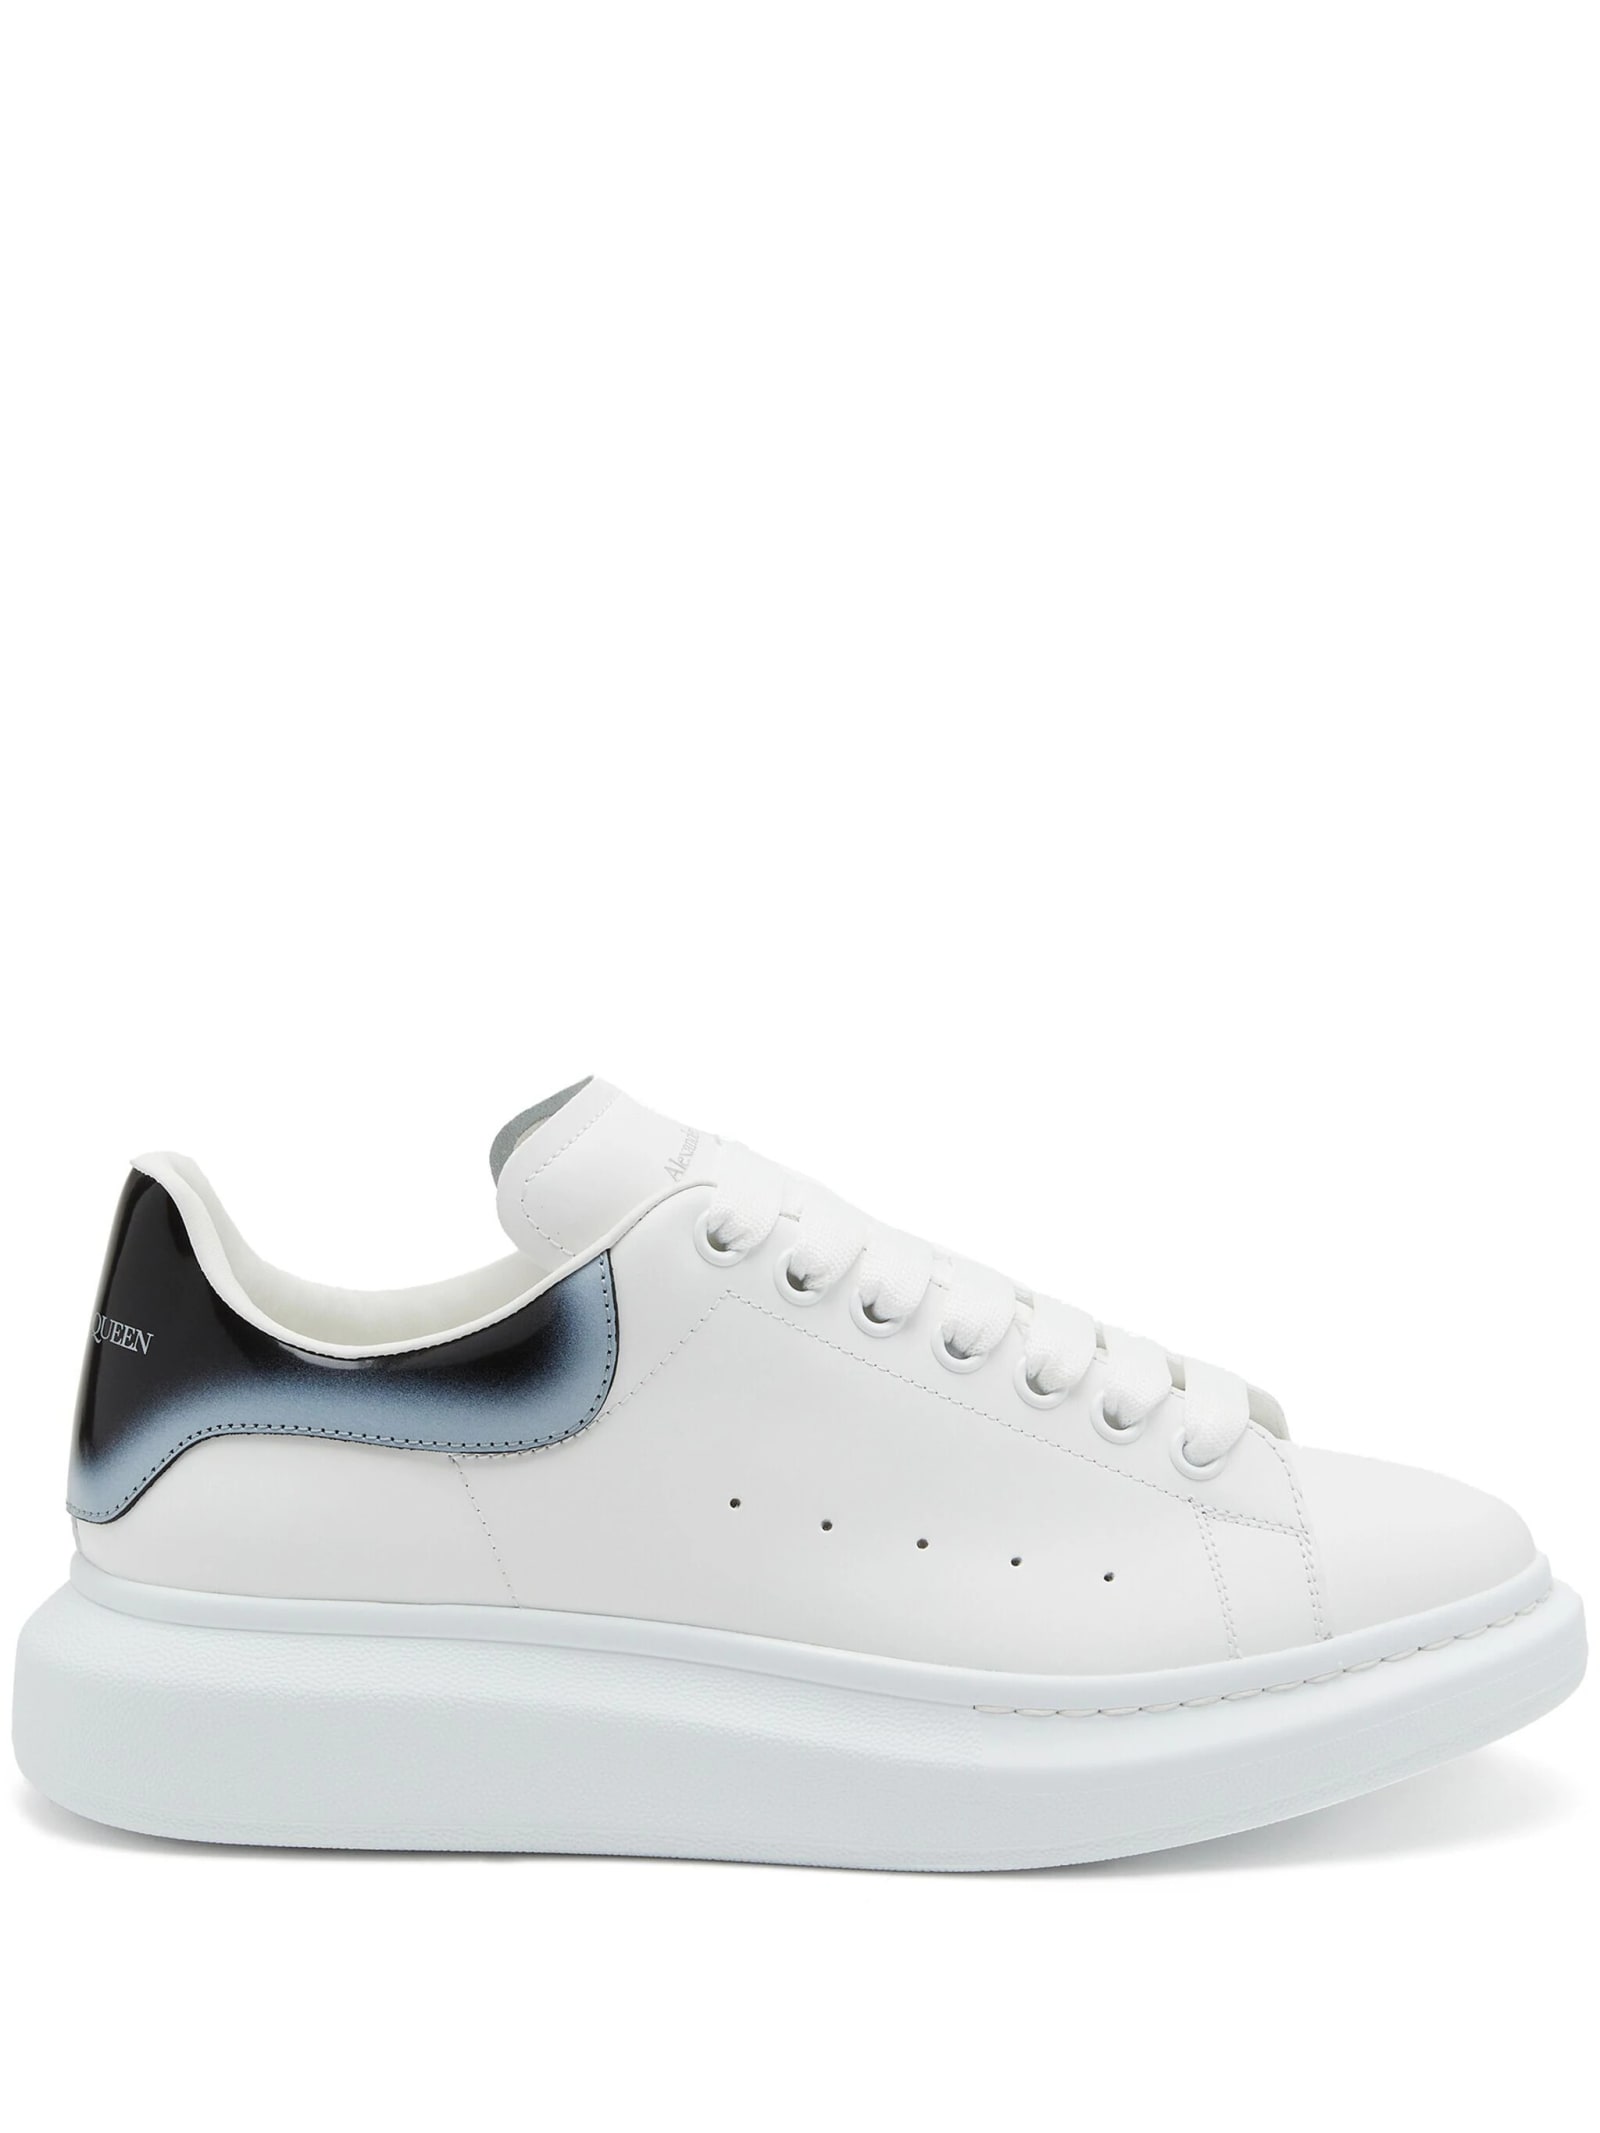 ALEXANDER MCQUEEN OVERSIZED SNEAKERS IN WHITE AND BLACK